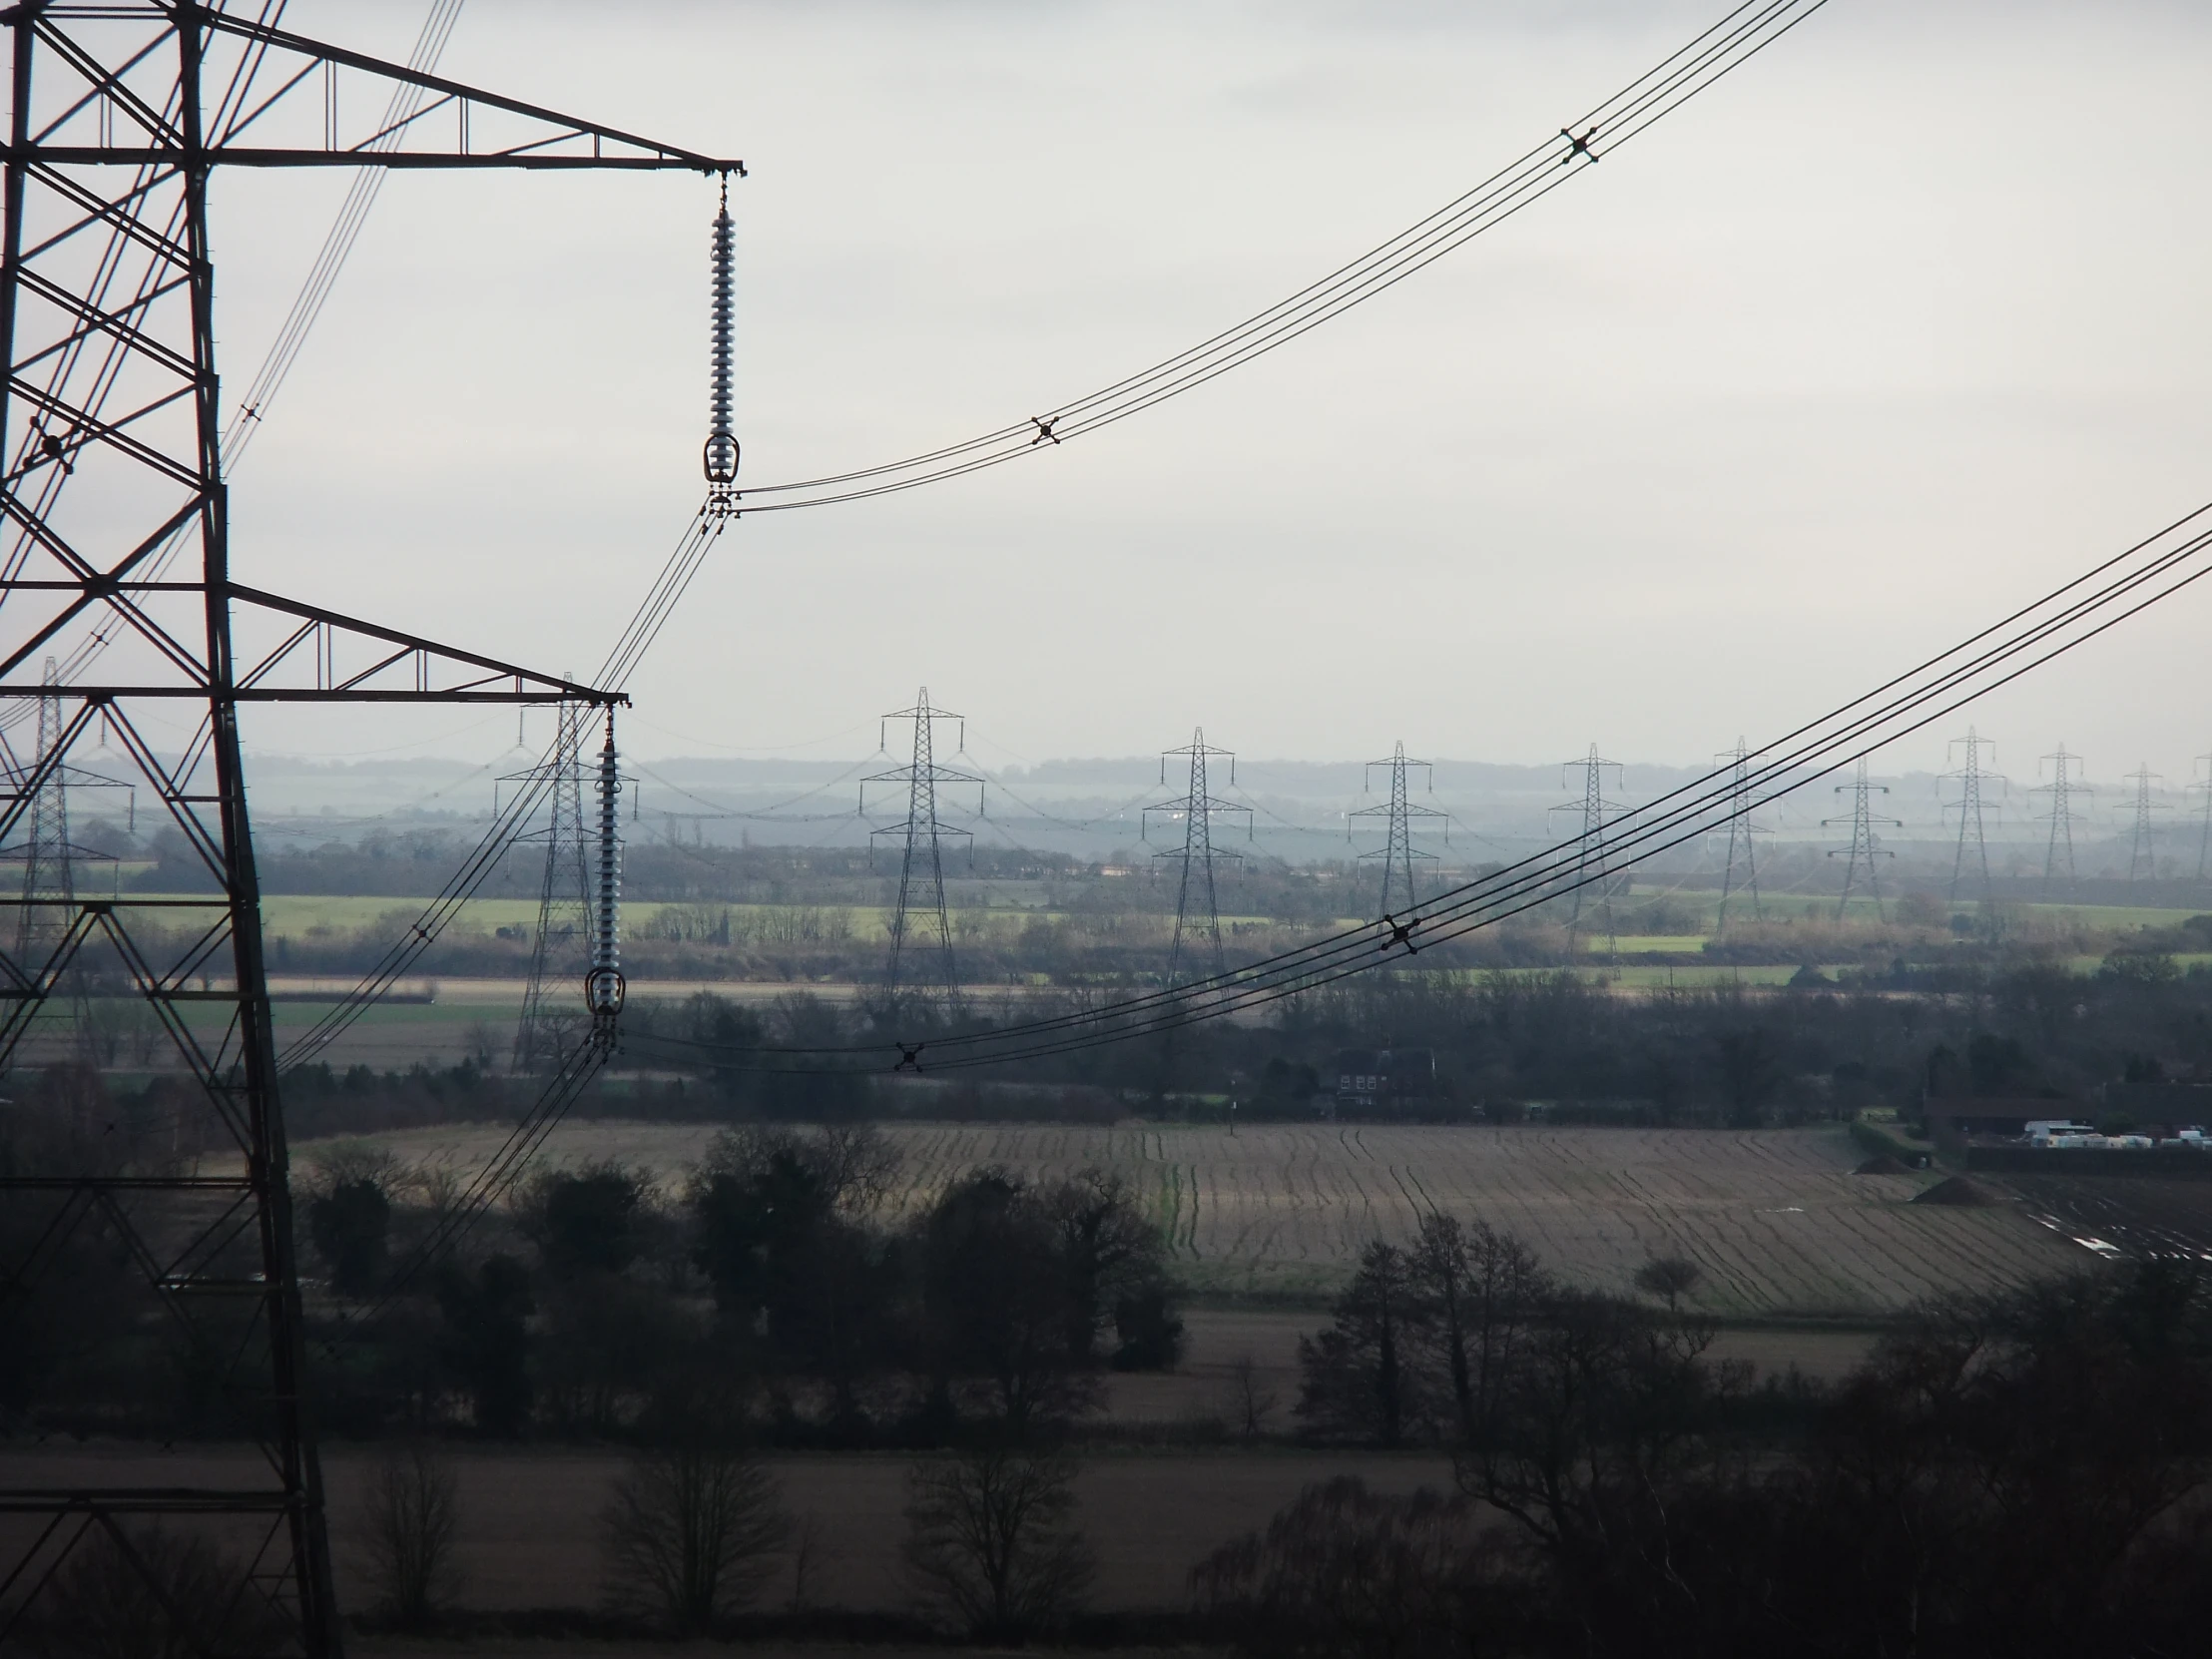 the view of some power lines next to fields